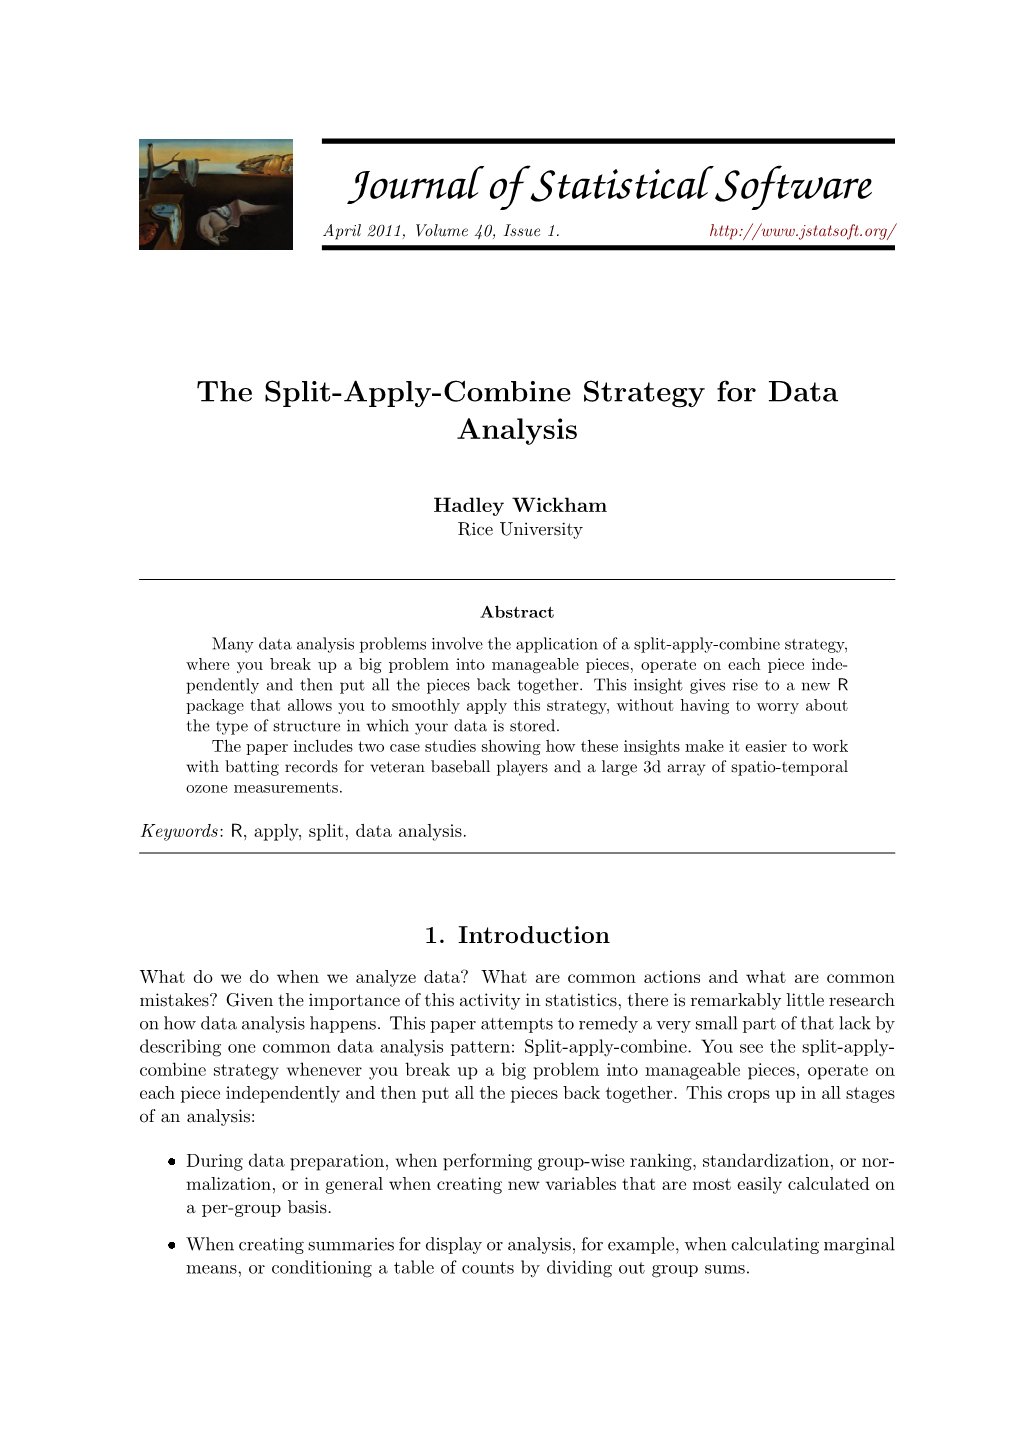 The Split-Apply-Combine Strategy for Data Analysis